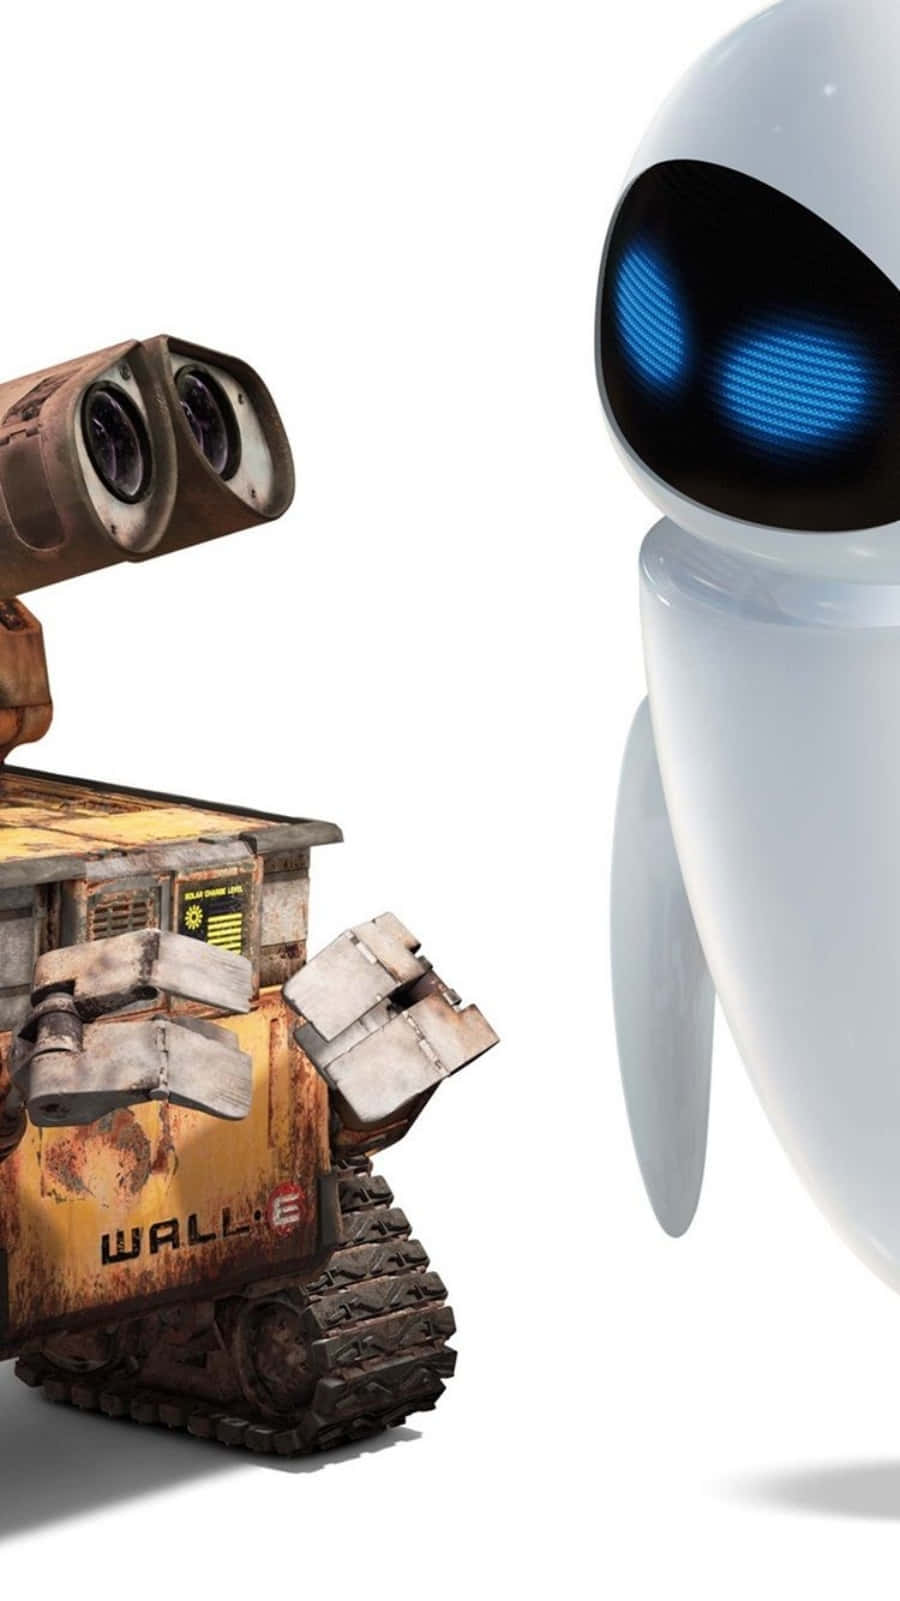 Eve And Wall E Iphone Wallpaper